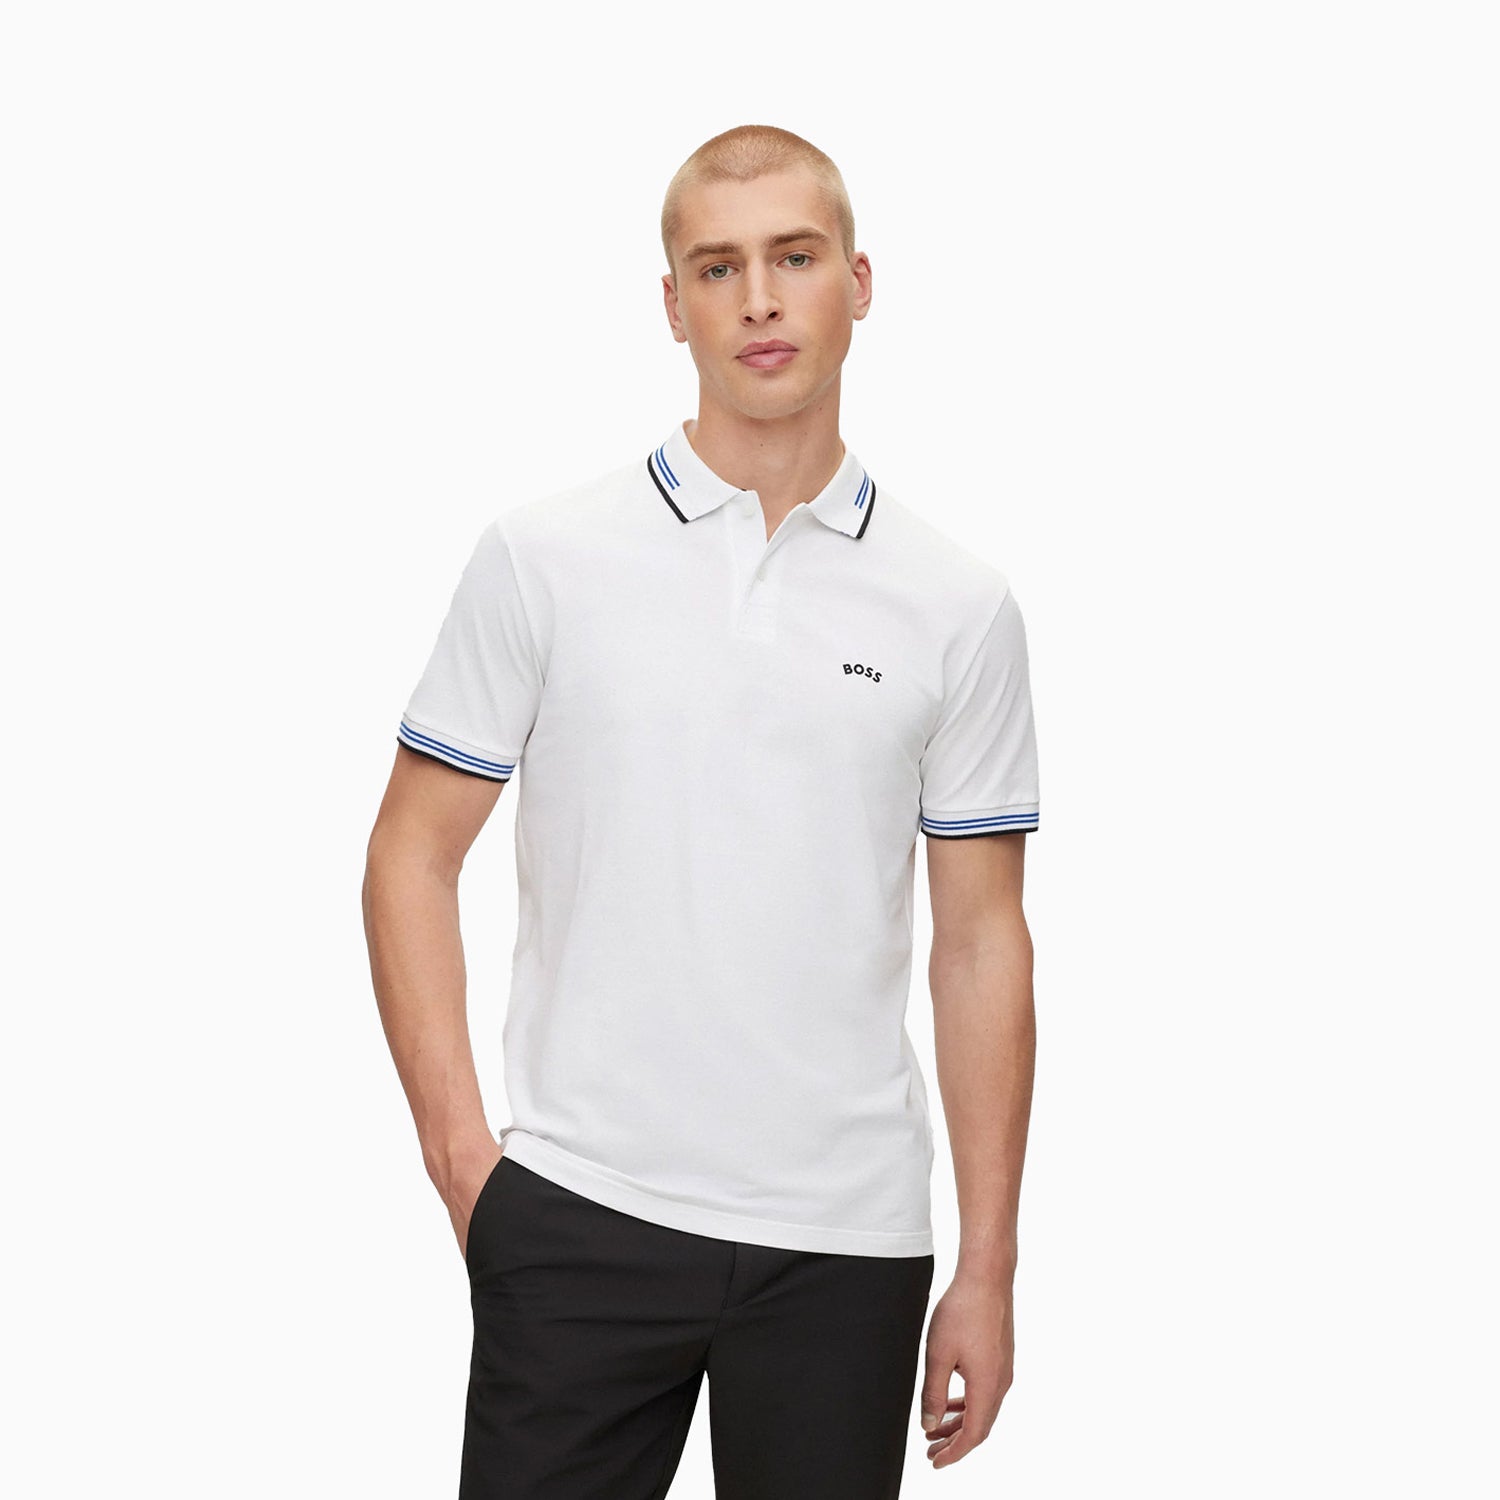 mens-stretch-cotton-slim-fit-polo-shirt-with-branded-undercollar-50505651-105